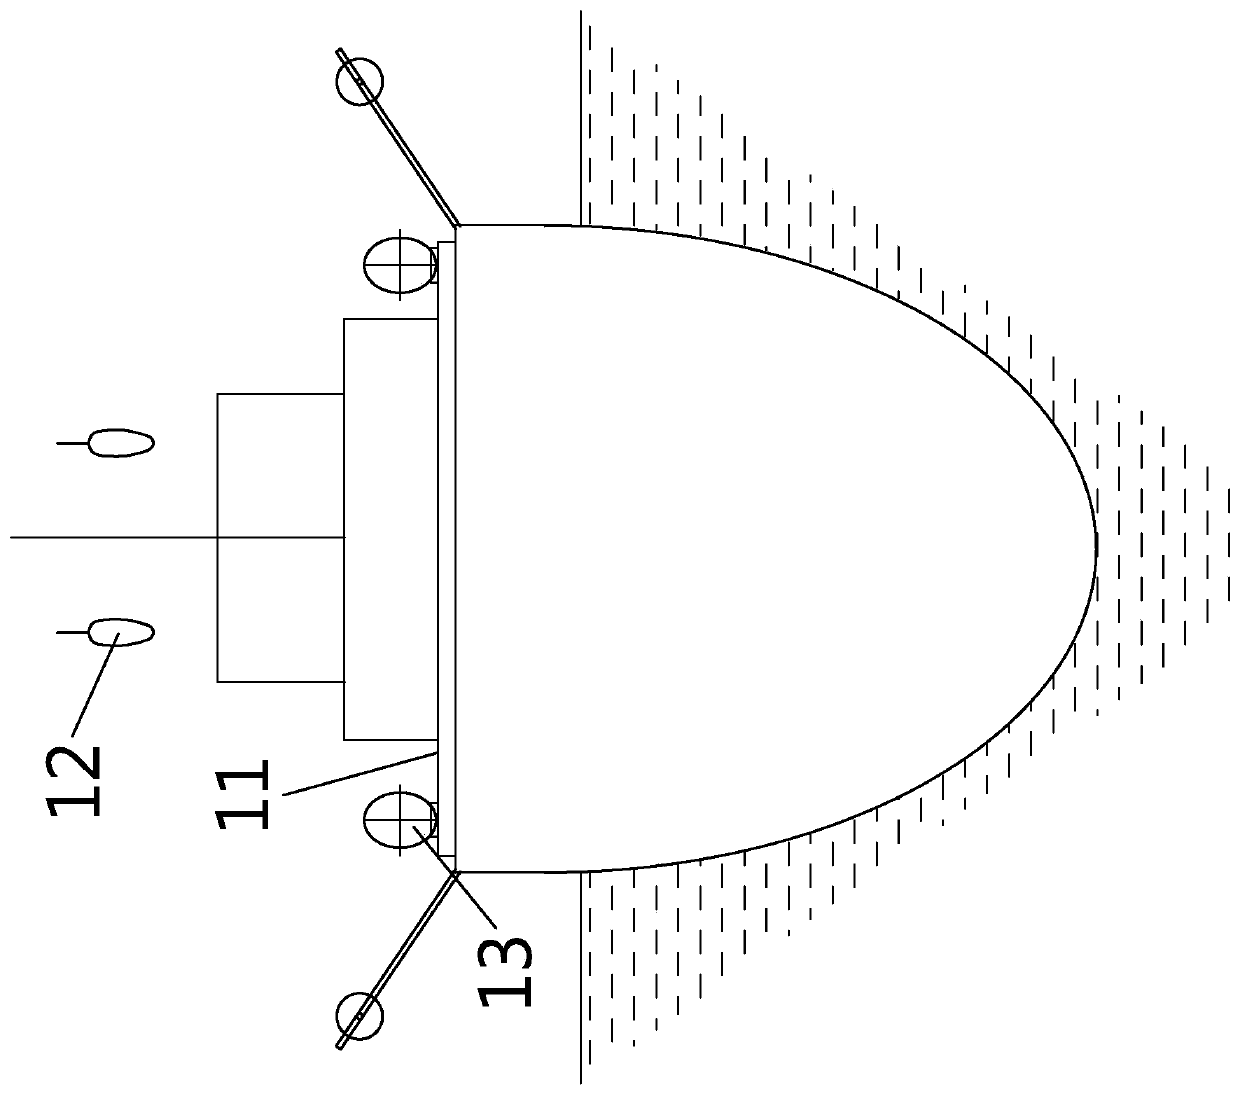 Fish collection illumination system and fish collection lamp thereof